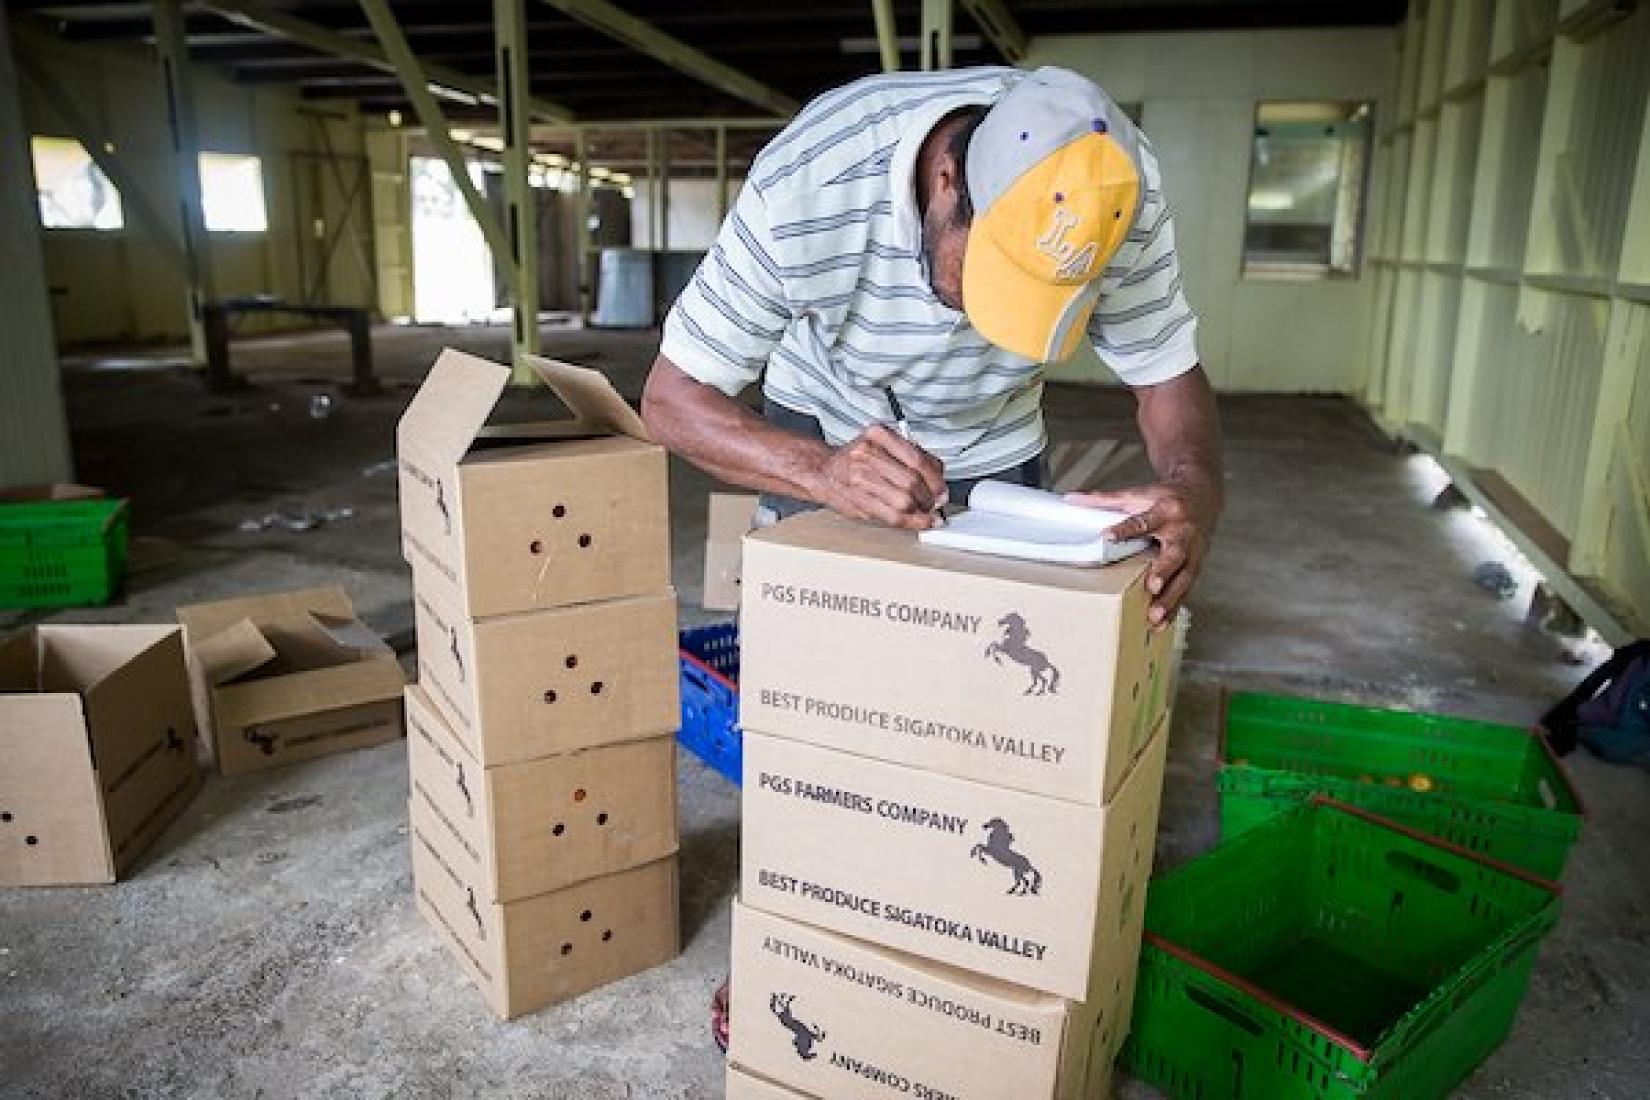 Jone Kunatui from Nawamangi PGS company writes a receipt for the 8 boxes of tomatoes (160kg) to be delivered to the Intercontinental Hotel and Resort. Image: ACIAR /Conor Ashleigh